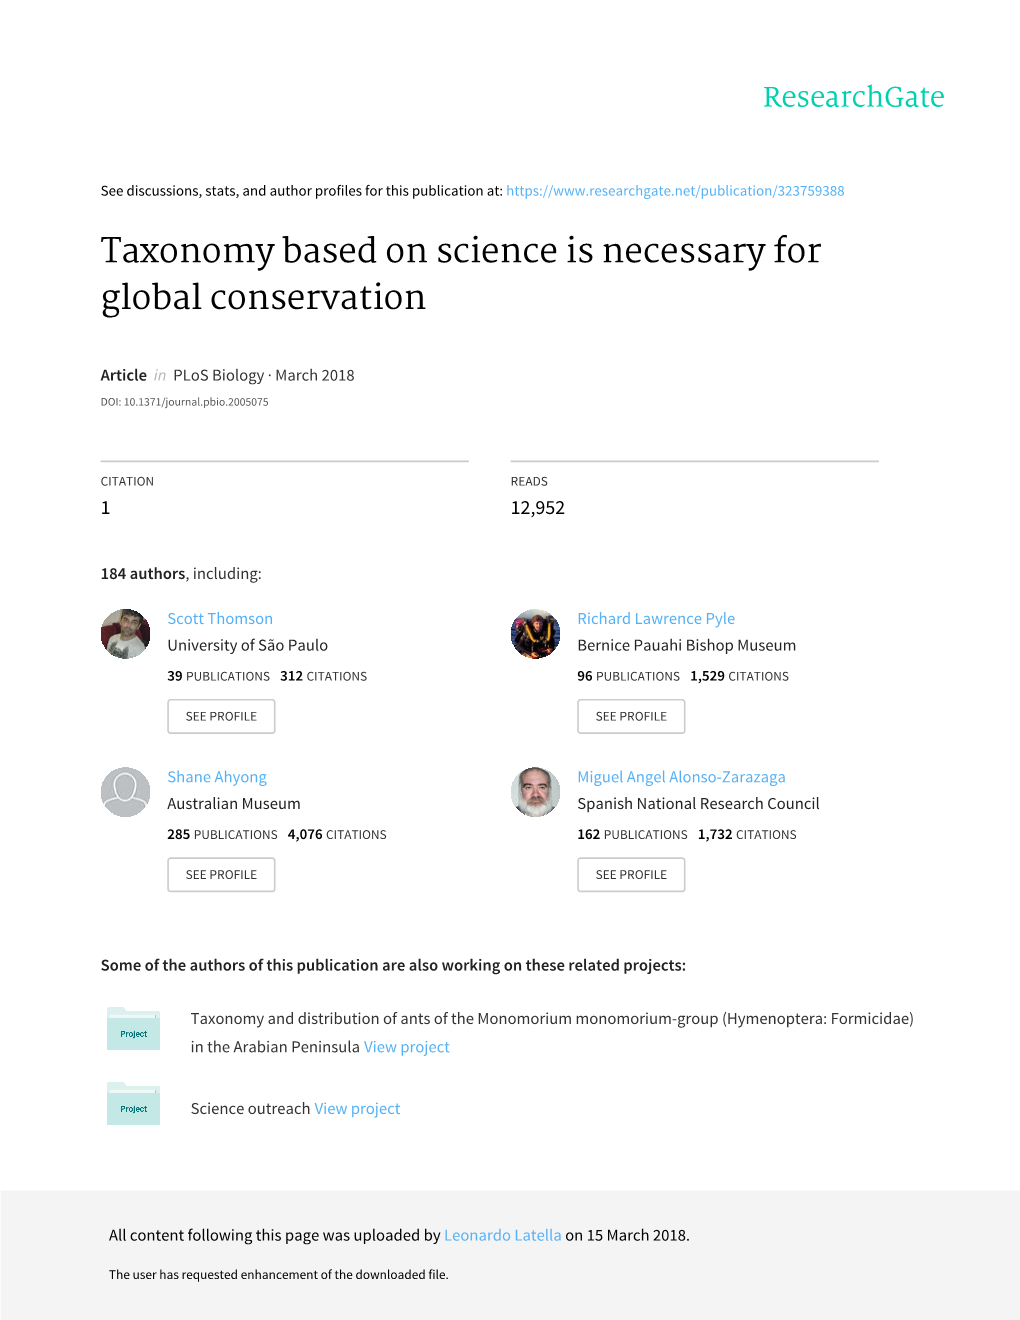 Taxonomy Based on Science Is Necessary for Global Conservation